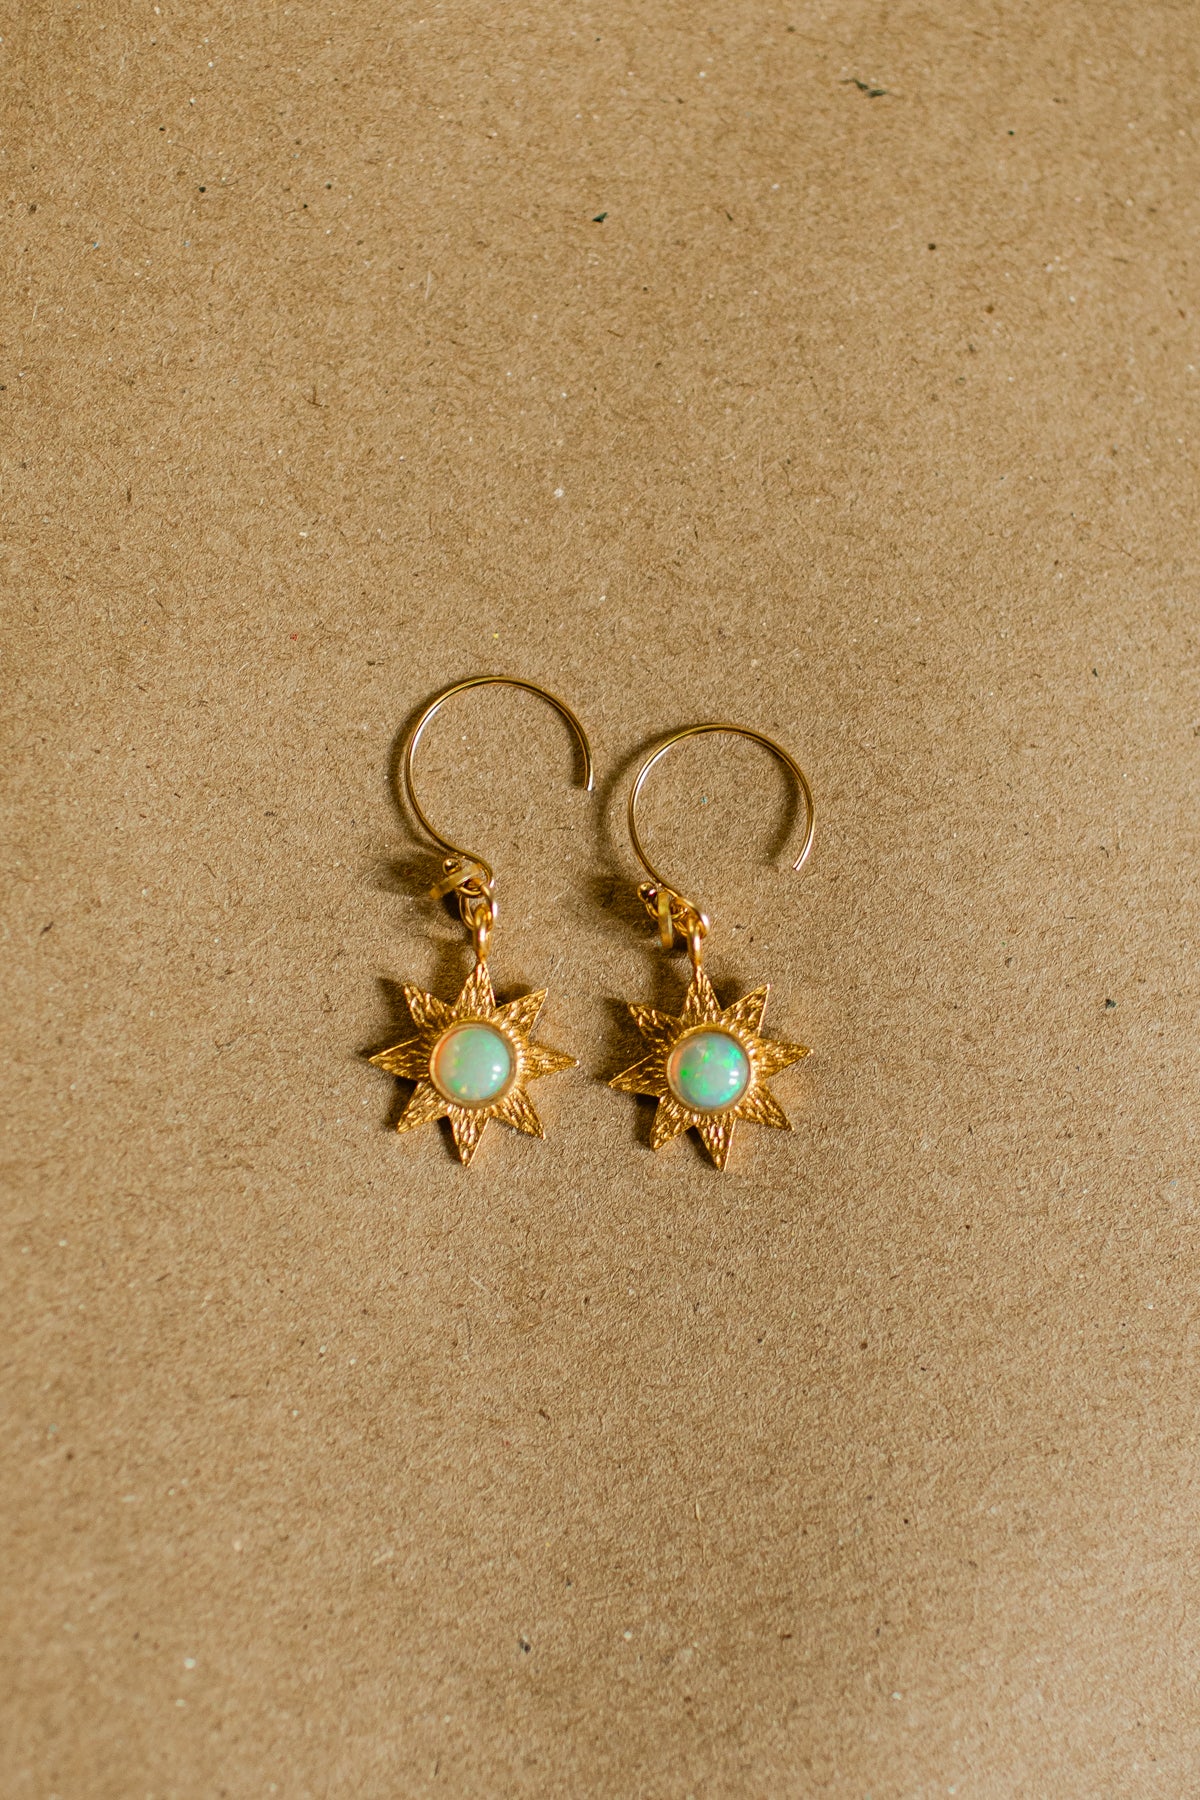 Opal star earrings with 22kt gold